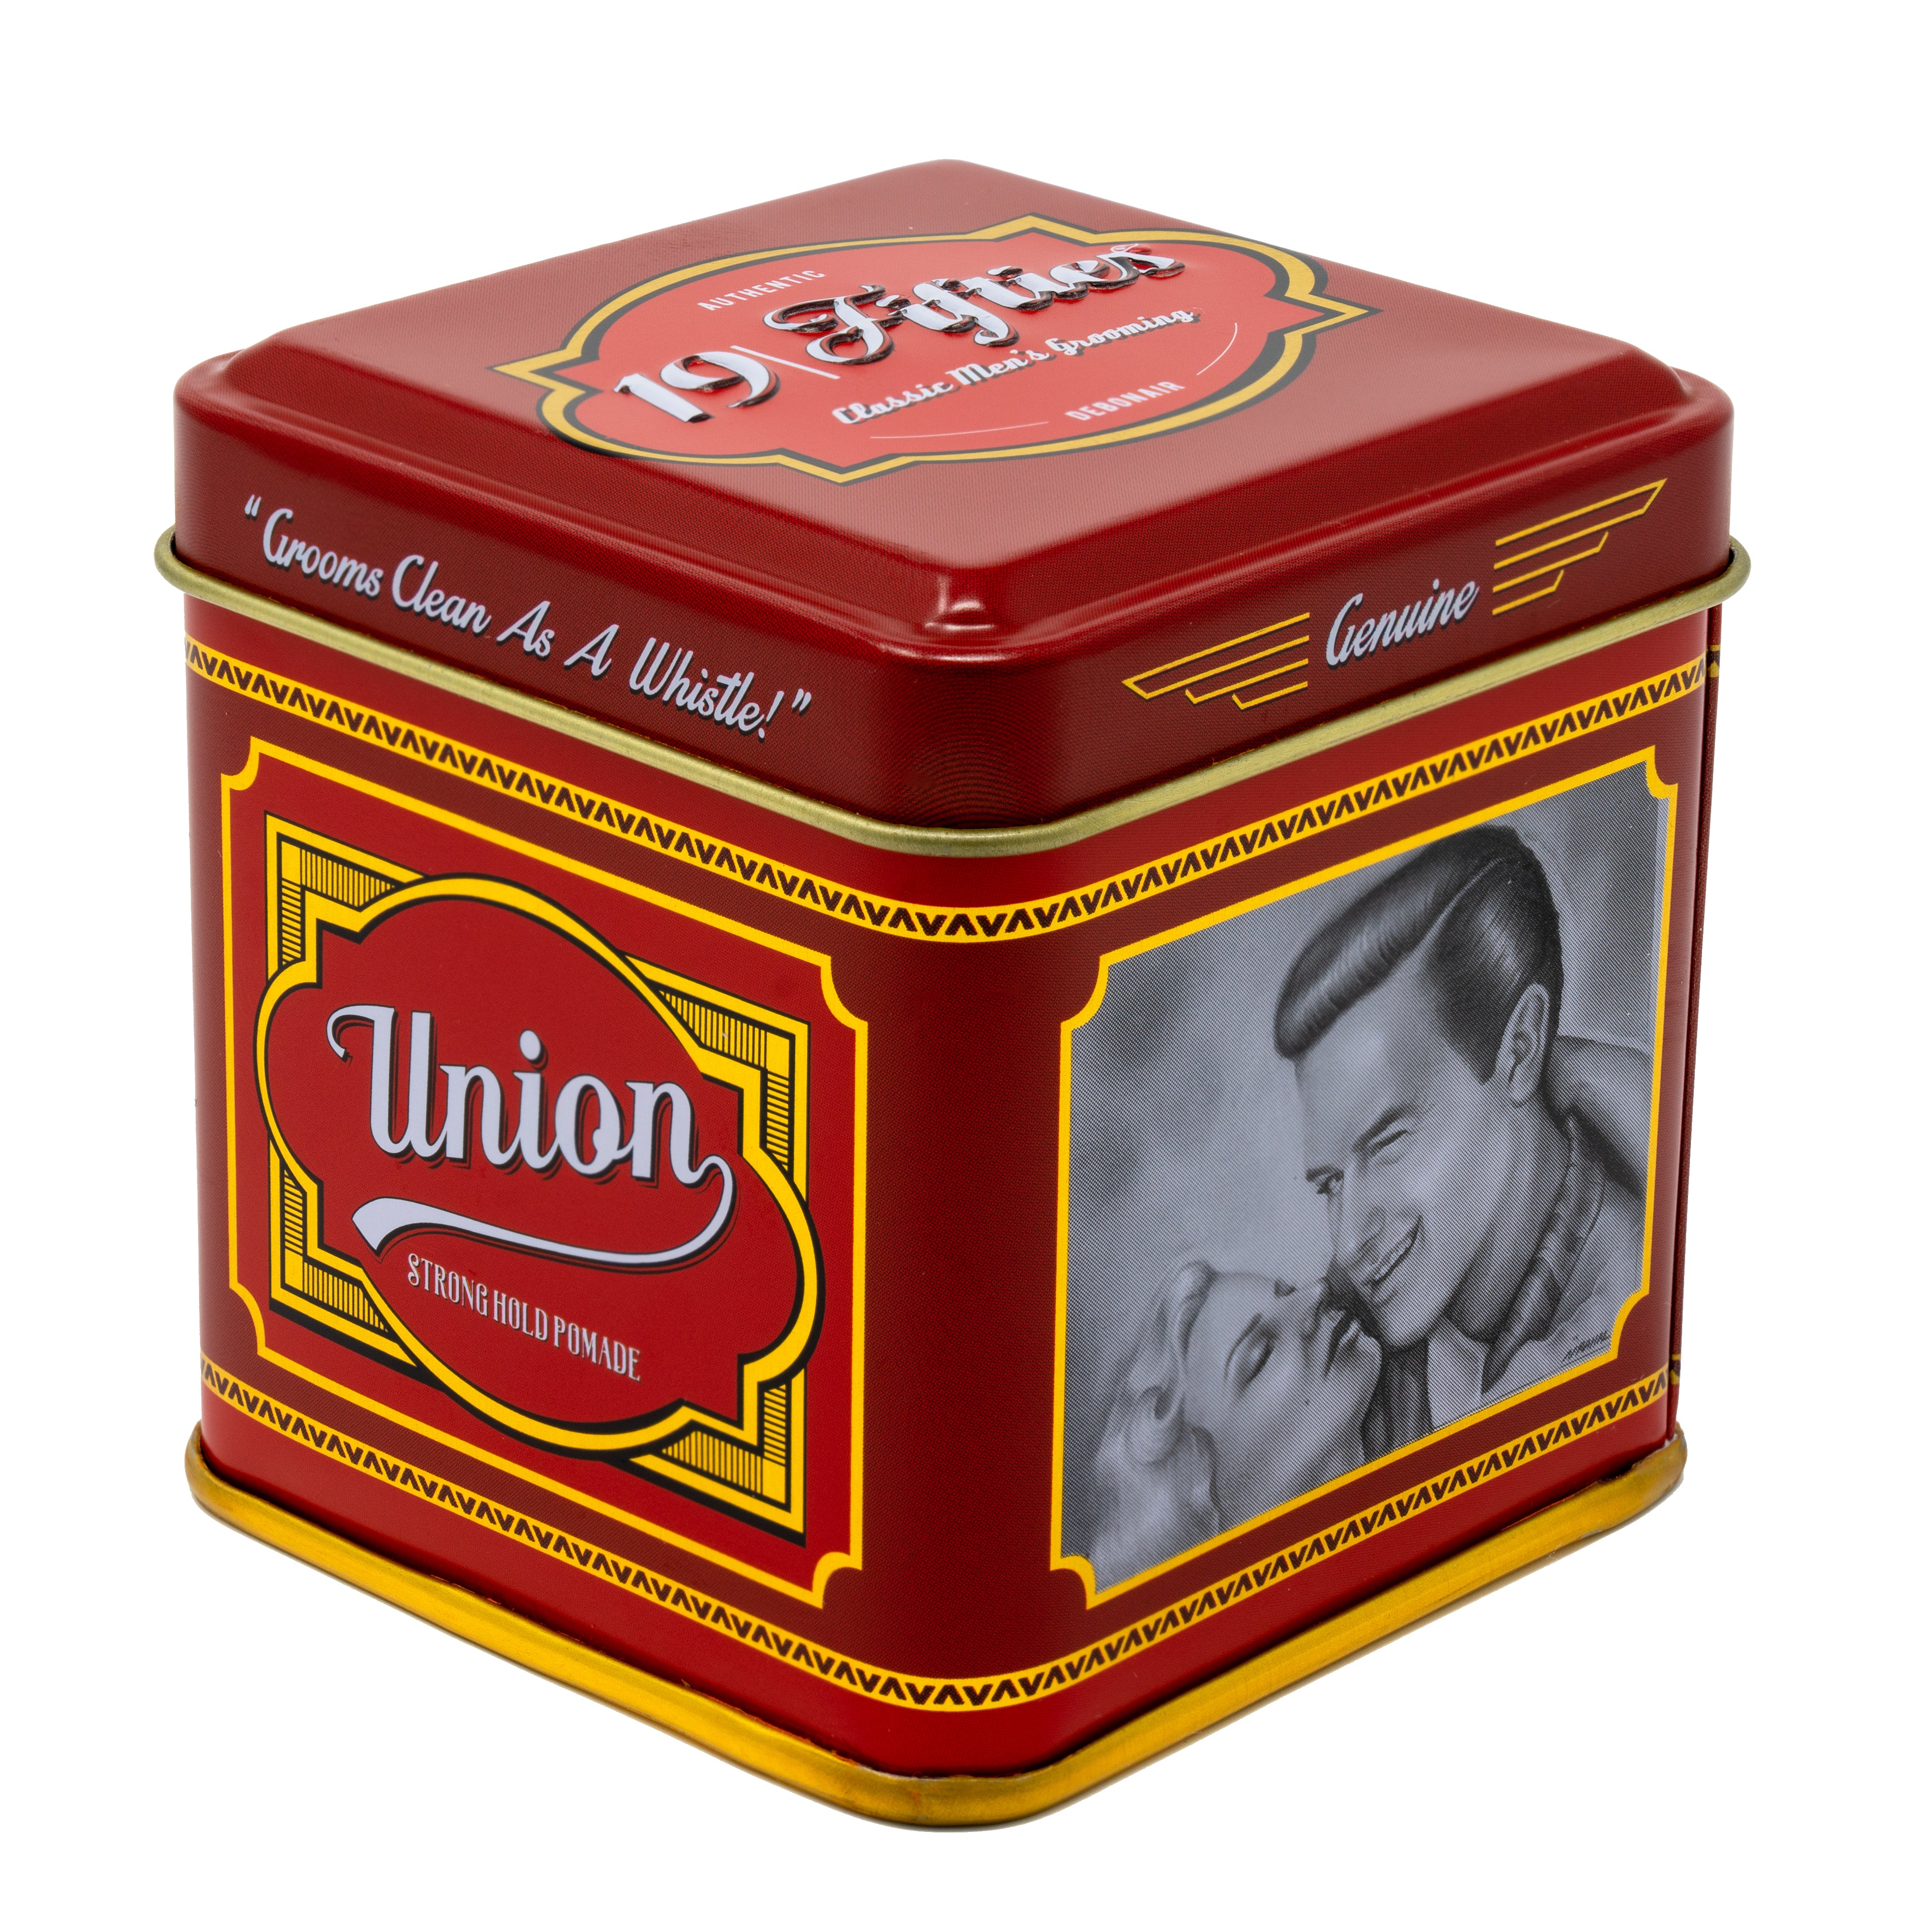 Union Strong Hold Pomade